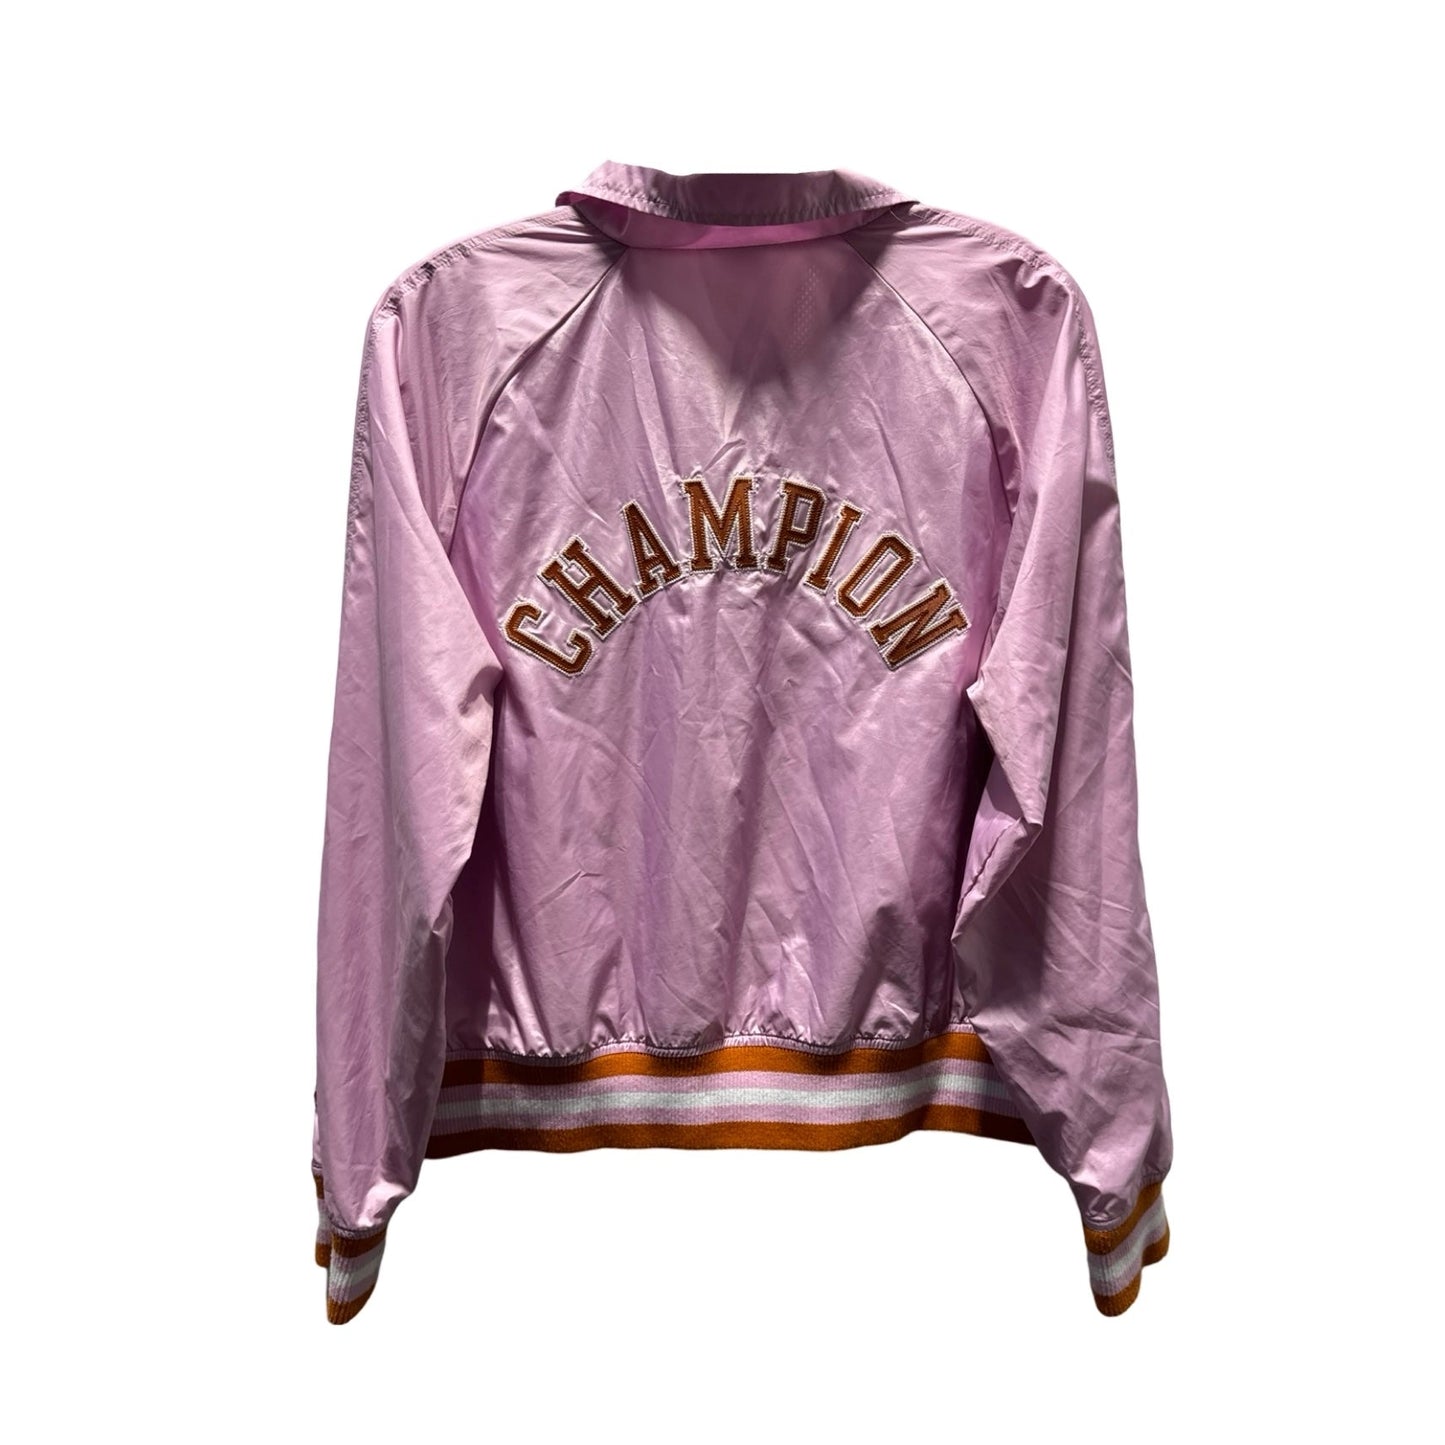 Athletic Jacket By Champion  Size: M